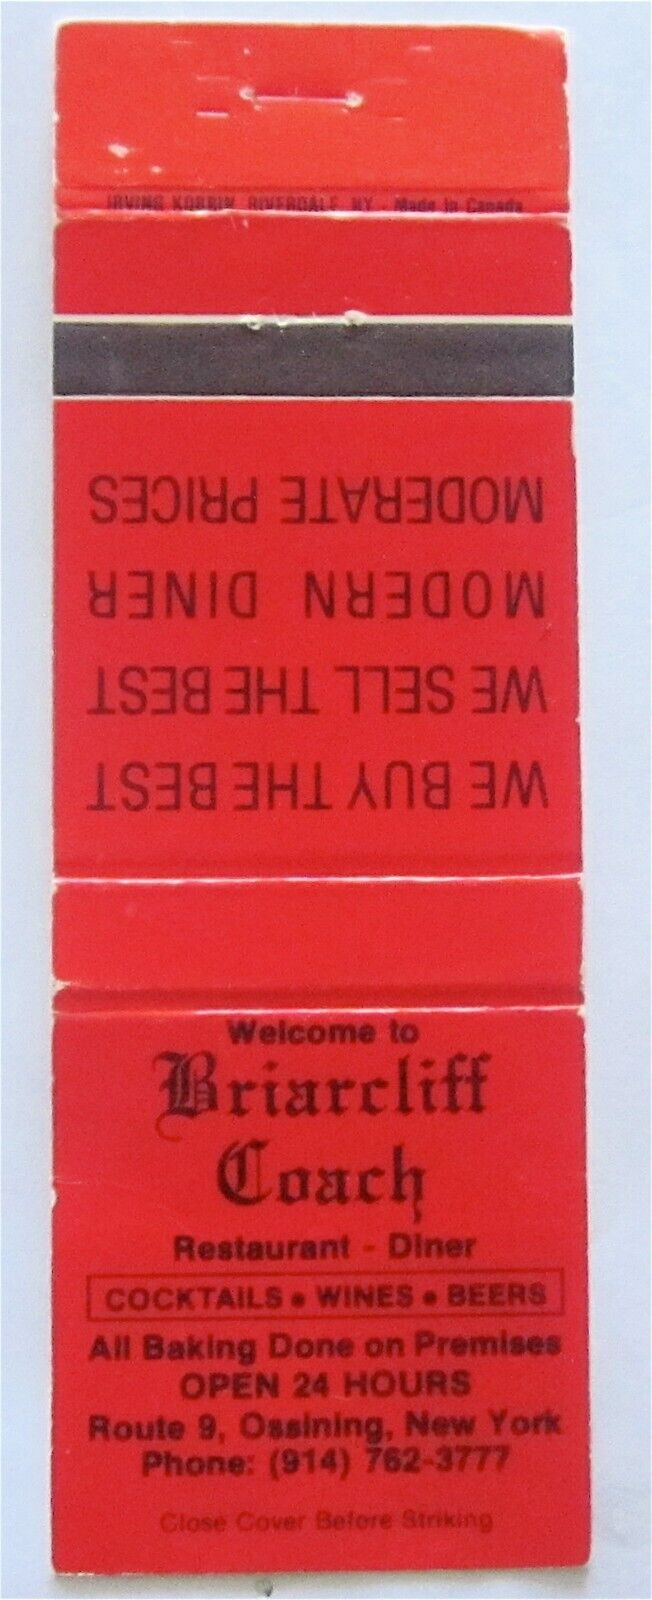 BRIARCLIFF COACH RESTAURANT - DINNER, OSSINING, NY MATCHBOOK COVER